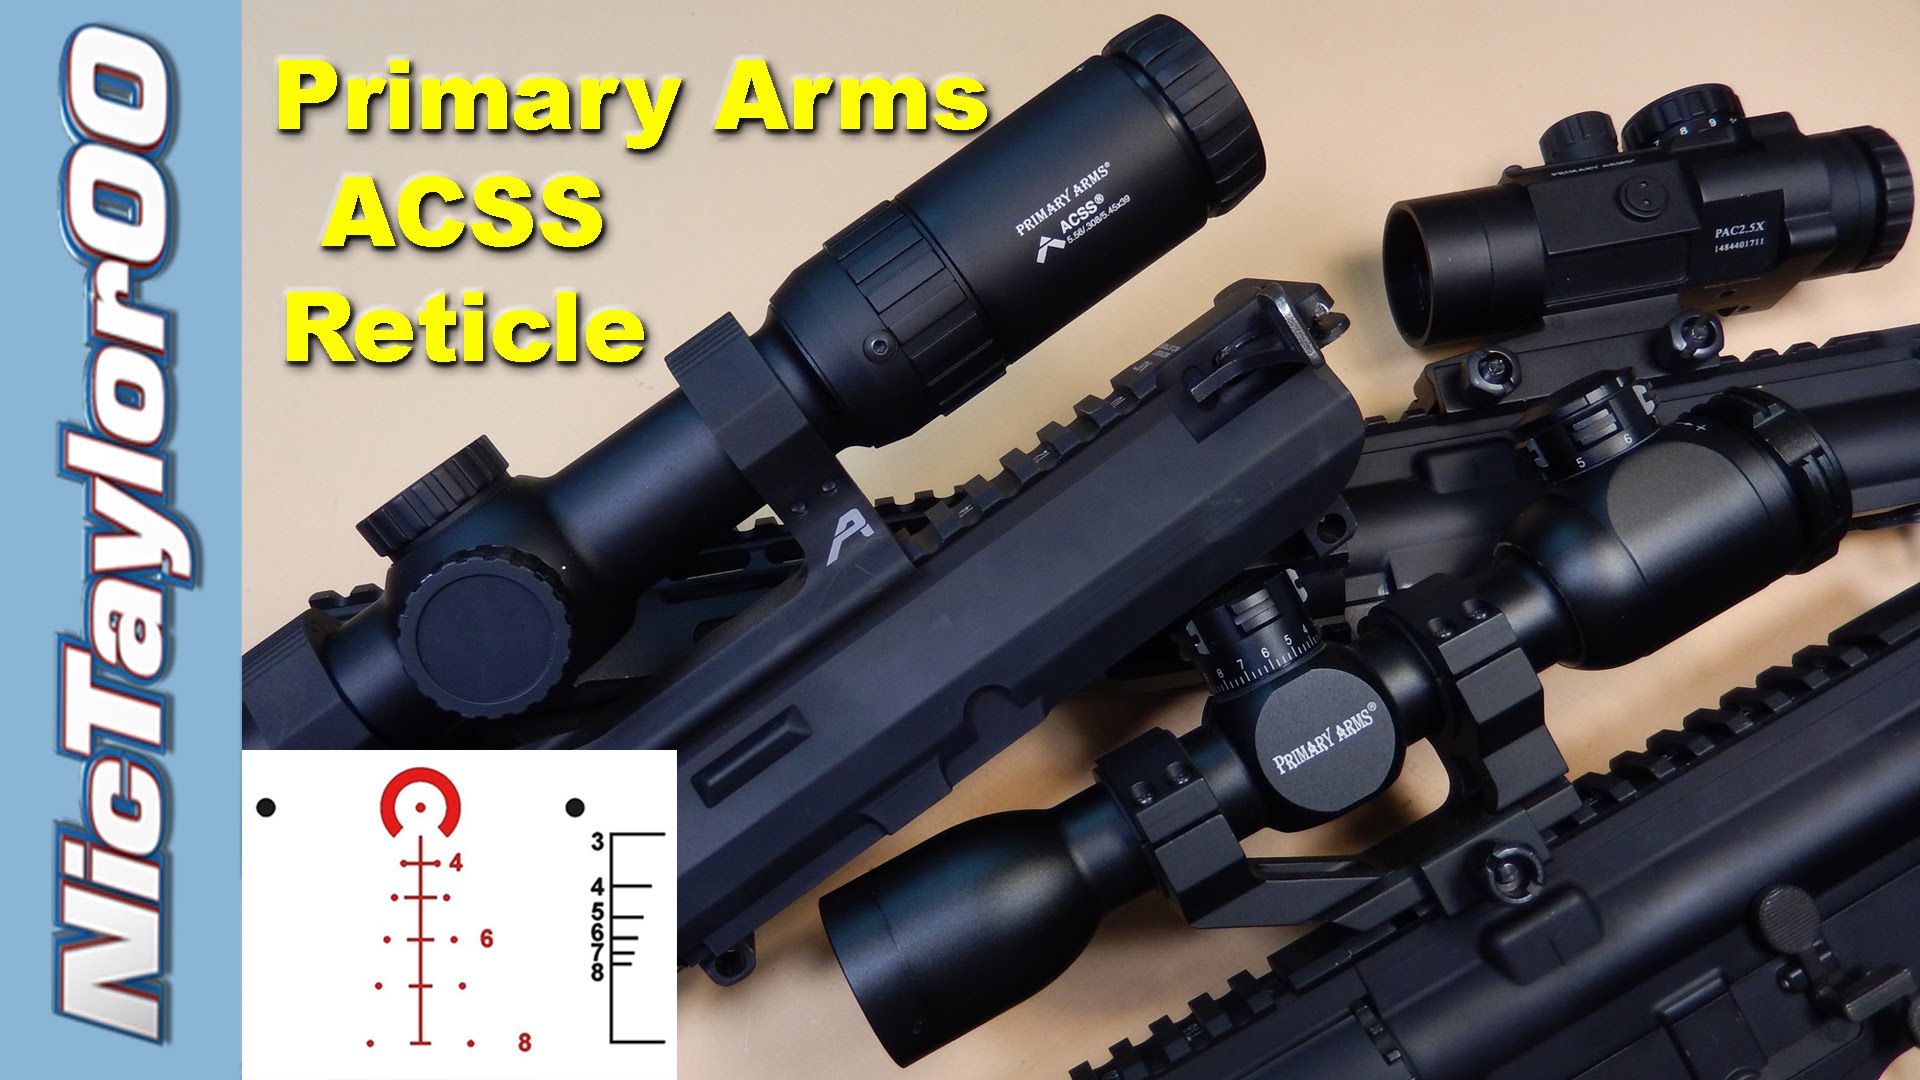 Primary Arms and the ACSS Reticle - Easiest Scopes to Shoot